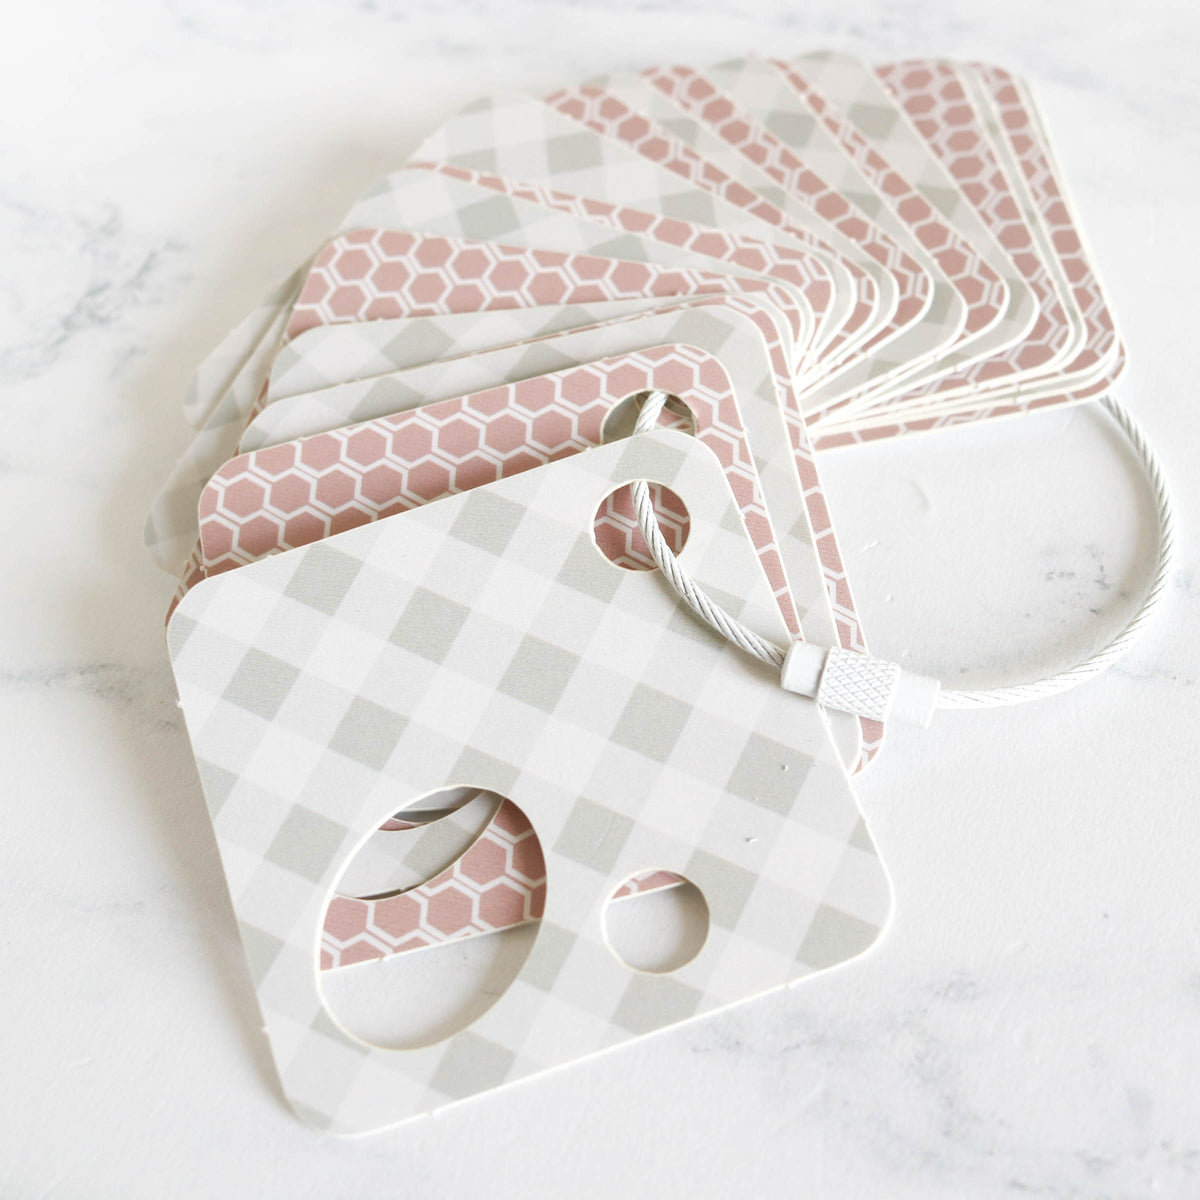 Embroidery Floss Drop Set - Gingham + Hexies